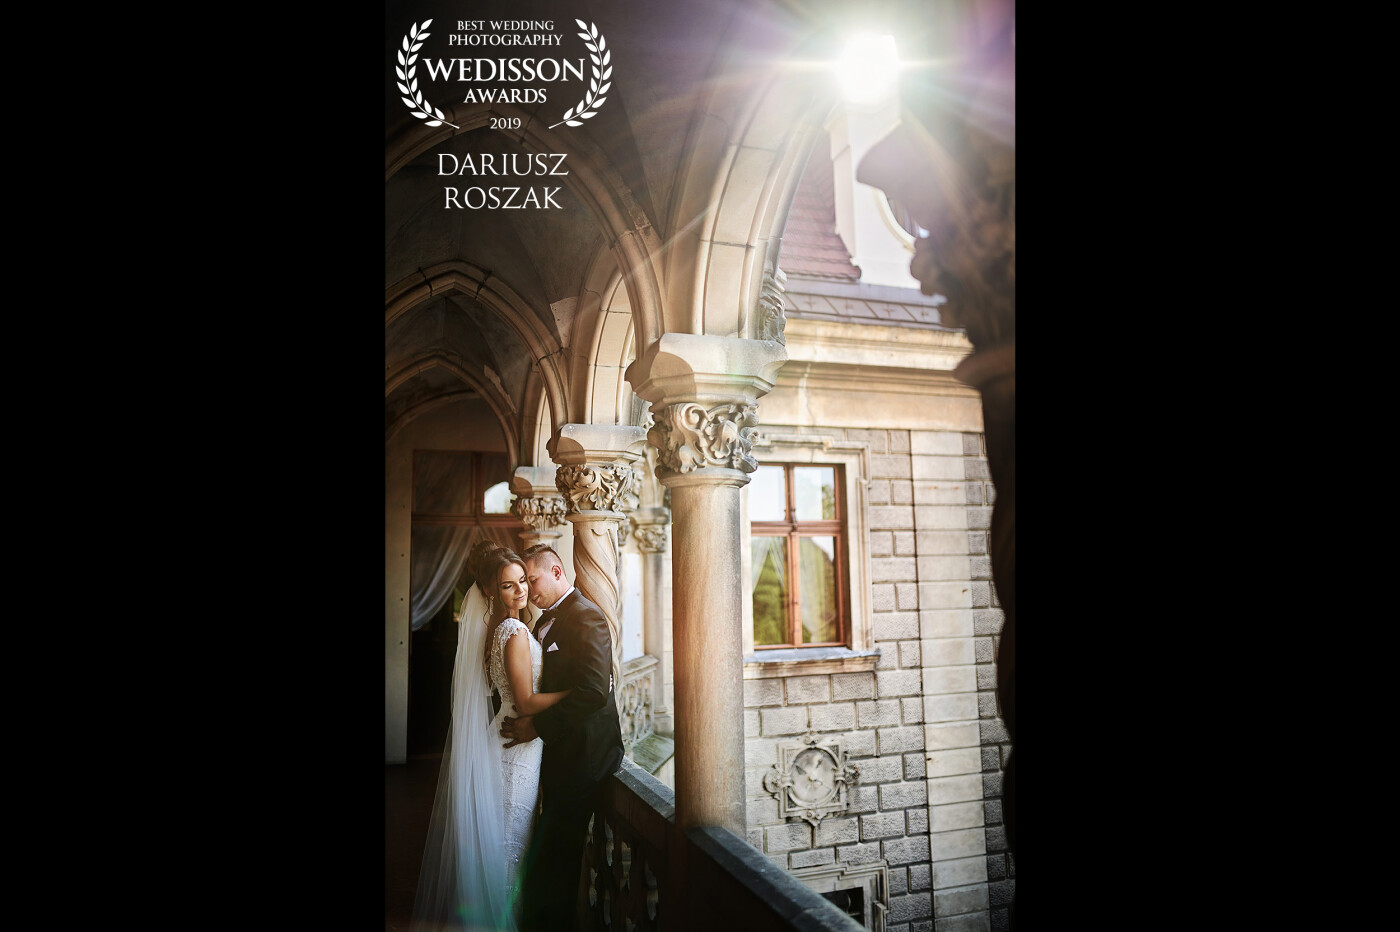 <br />
The picture was taken in Poland, one hour before the rain, in the beautiful Moszna Castle. The bride worked perfectly so taking the picture itself was just a formality; P I used the last rays of the sun that were breaking through the castle towers.